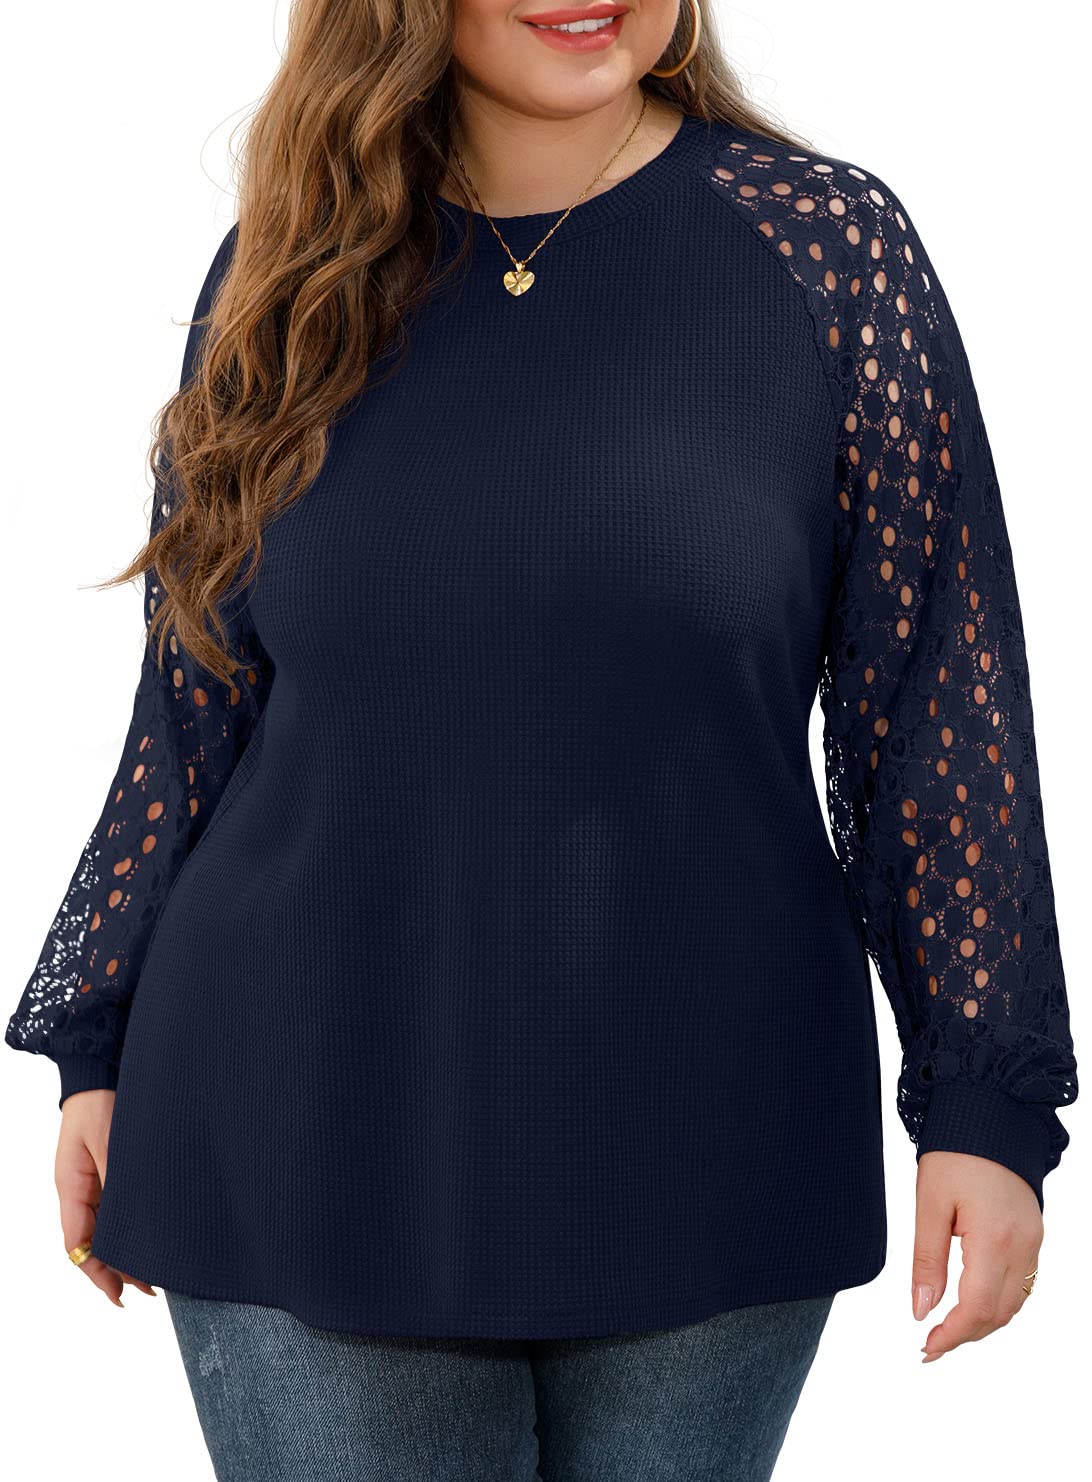 JWD Plus Size Tops for Women Lace Sleeve Blouse Waffle Knit Long/Short Sleeve Shirts